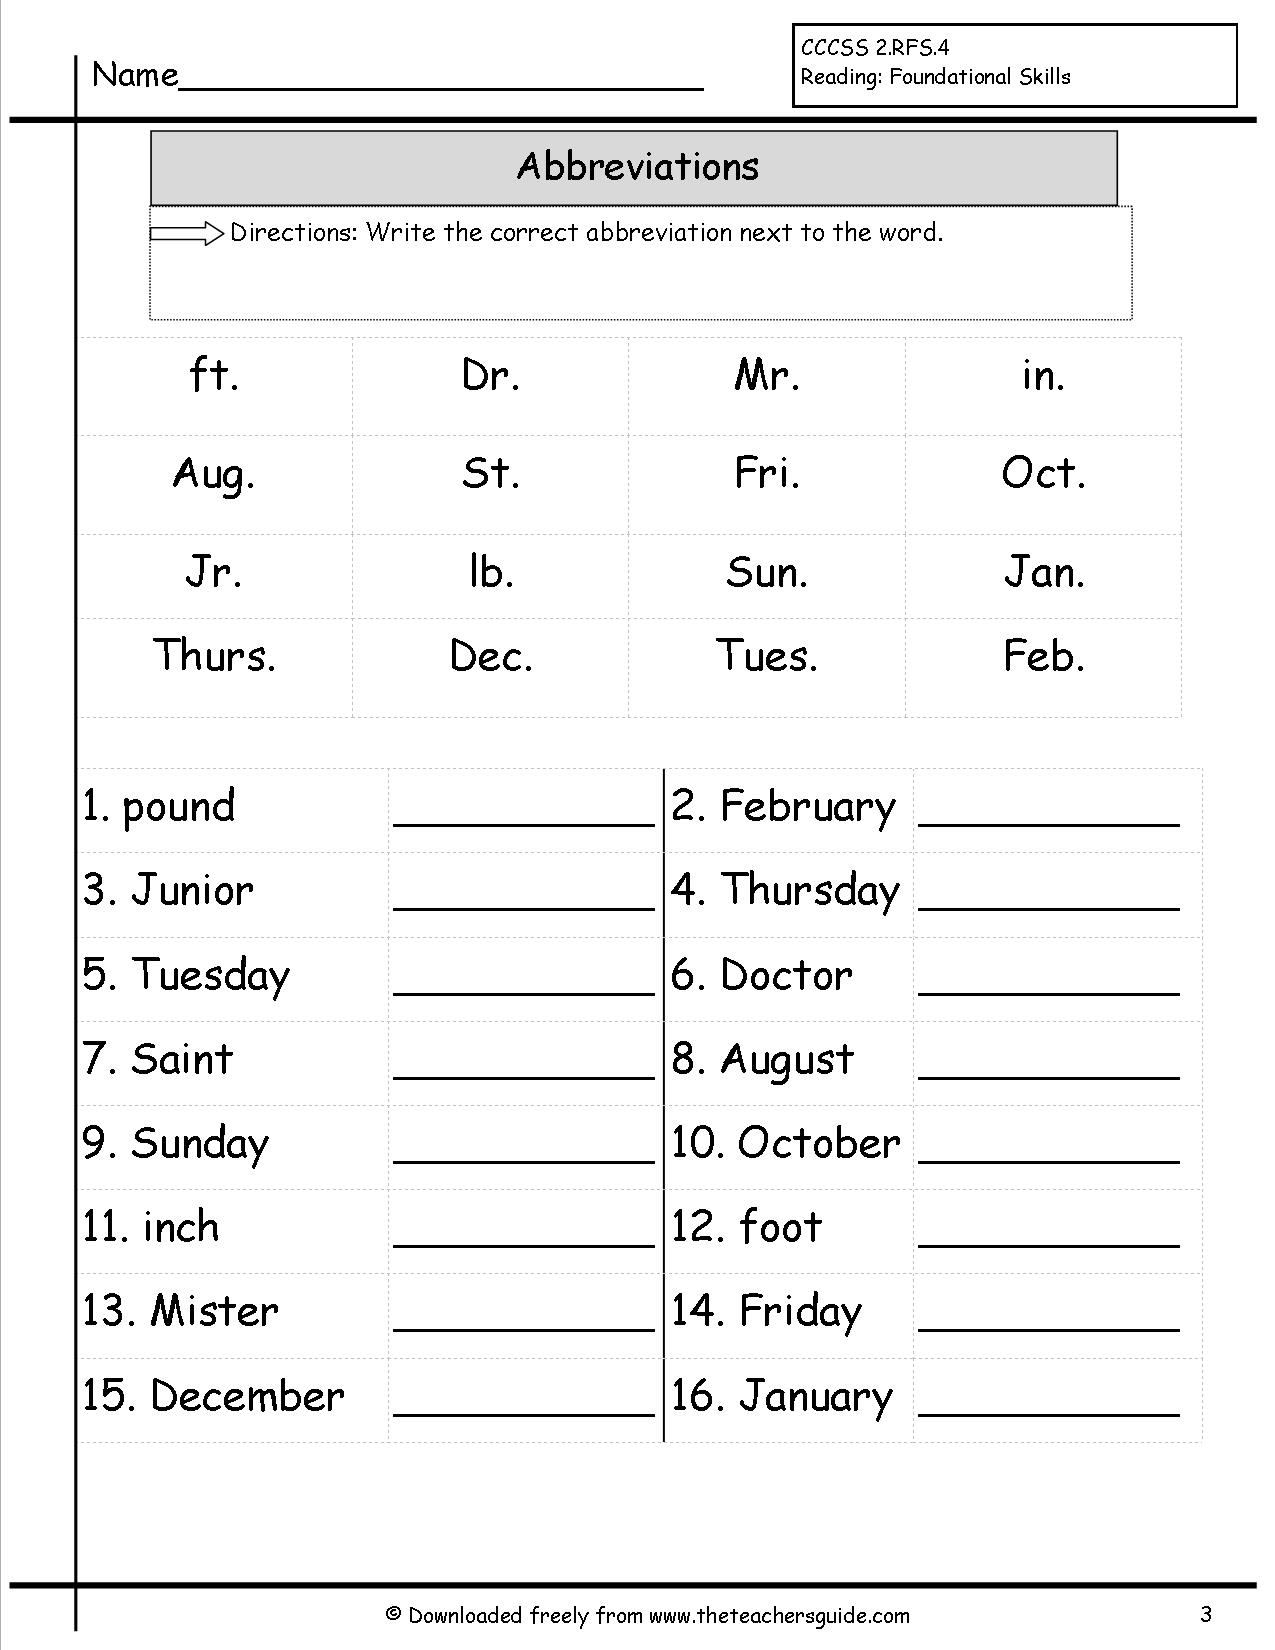 Abbreviations Worksheets From The Teacher&amp;#039;s Guide | Free Printable Abbreviation Worksheets